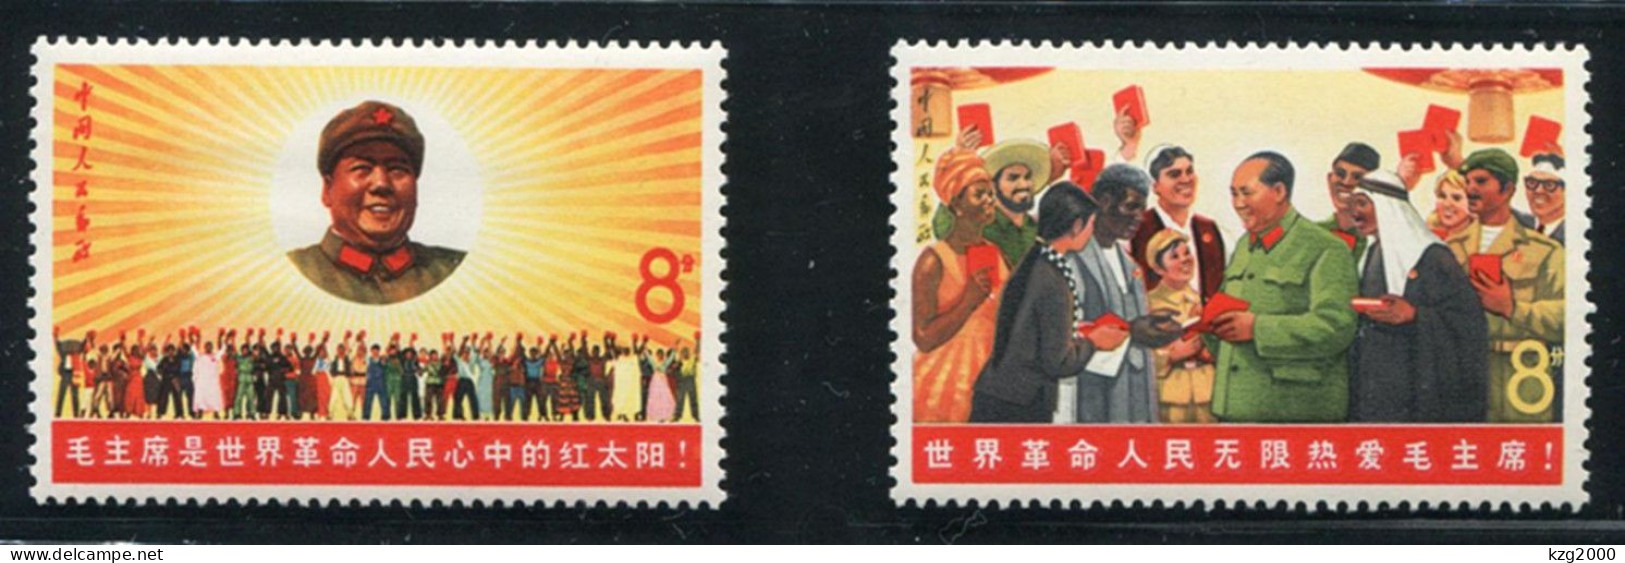 China Stamp 1967 W6  Chairman Mao  With People Of The World  OG Stamps - Unused Stamps